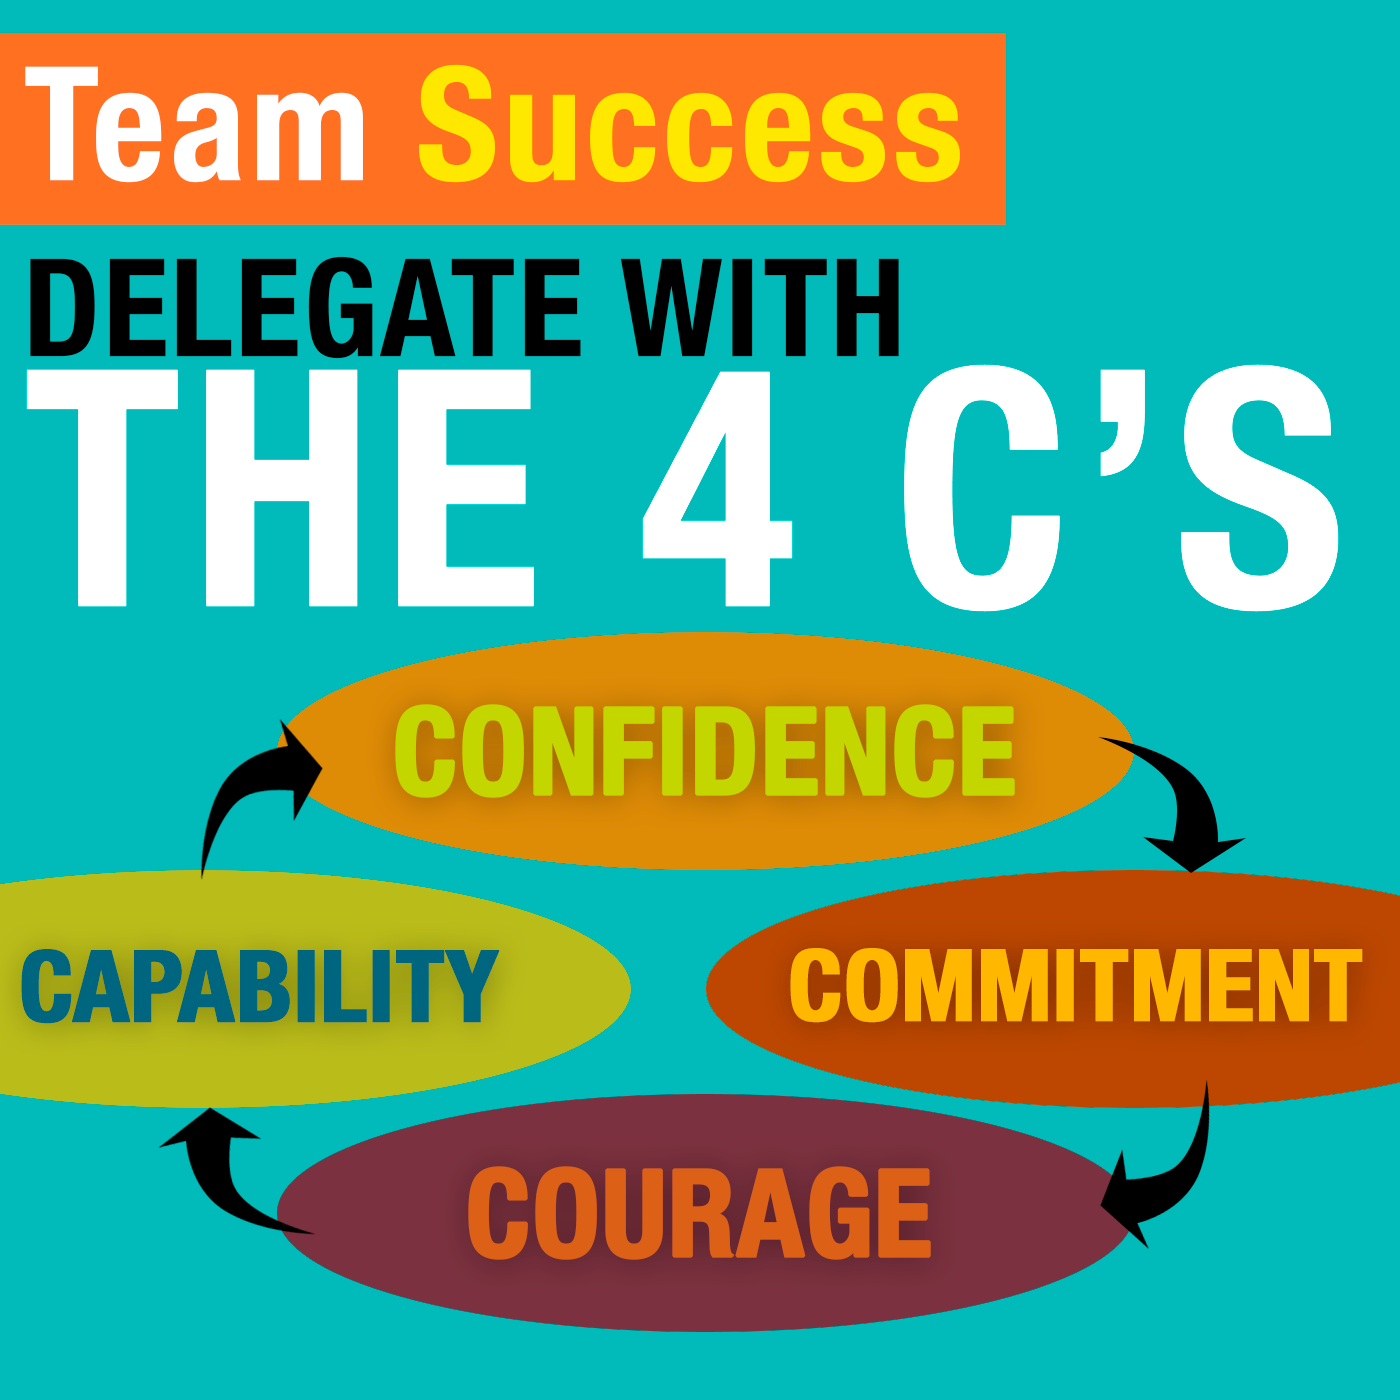 Delegate With The 4 C's